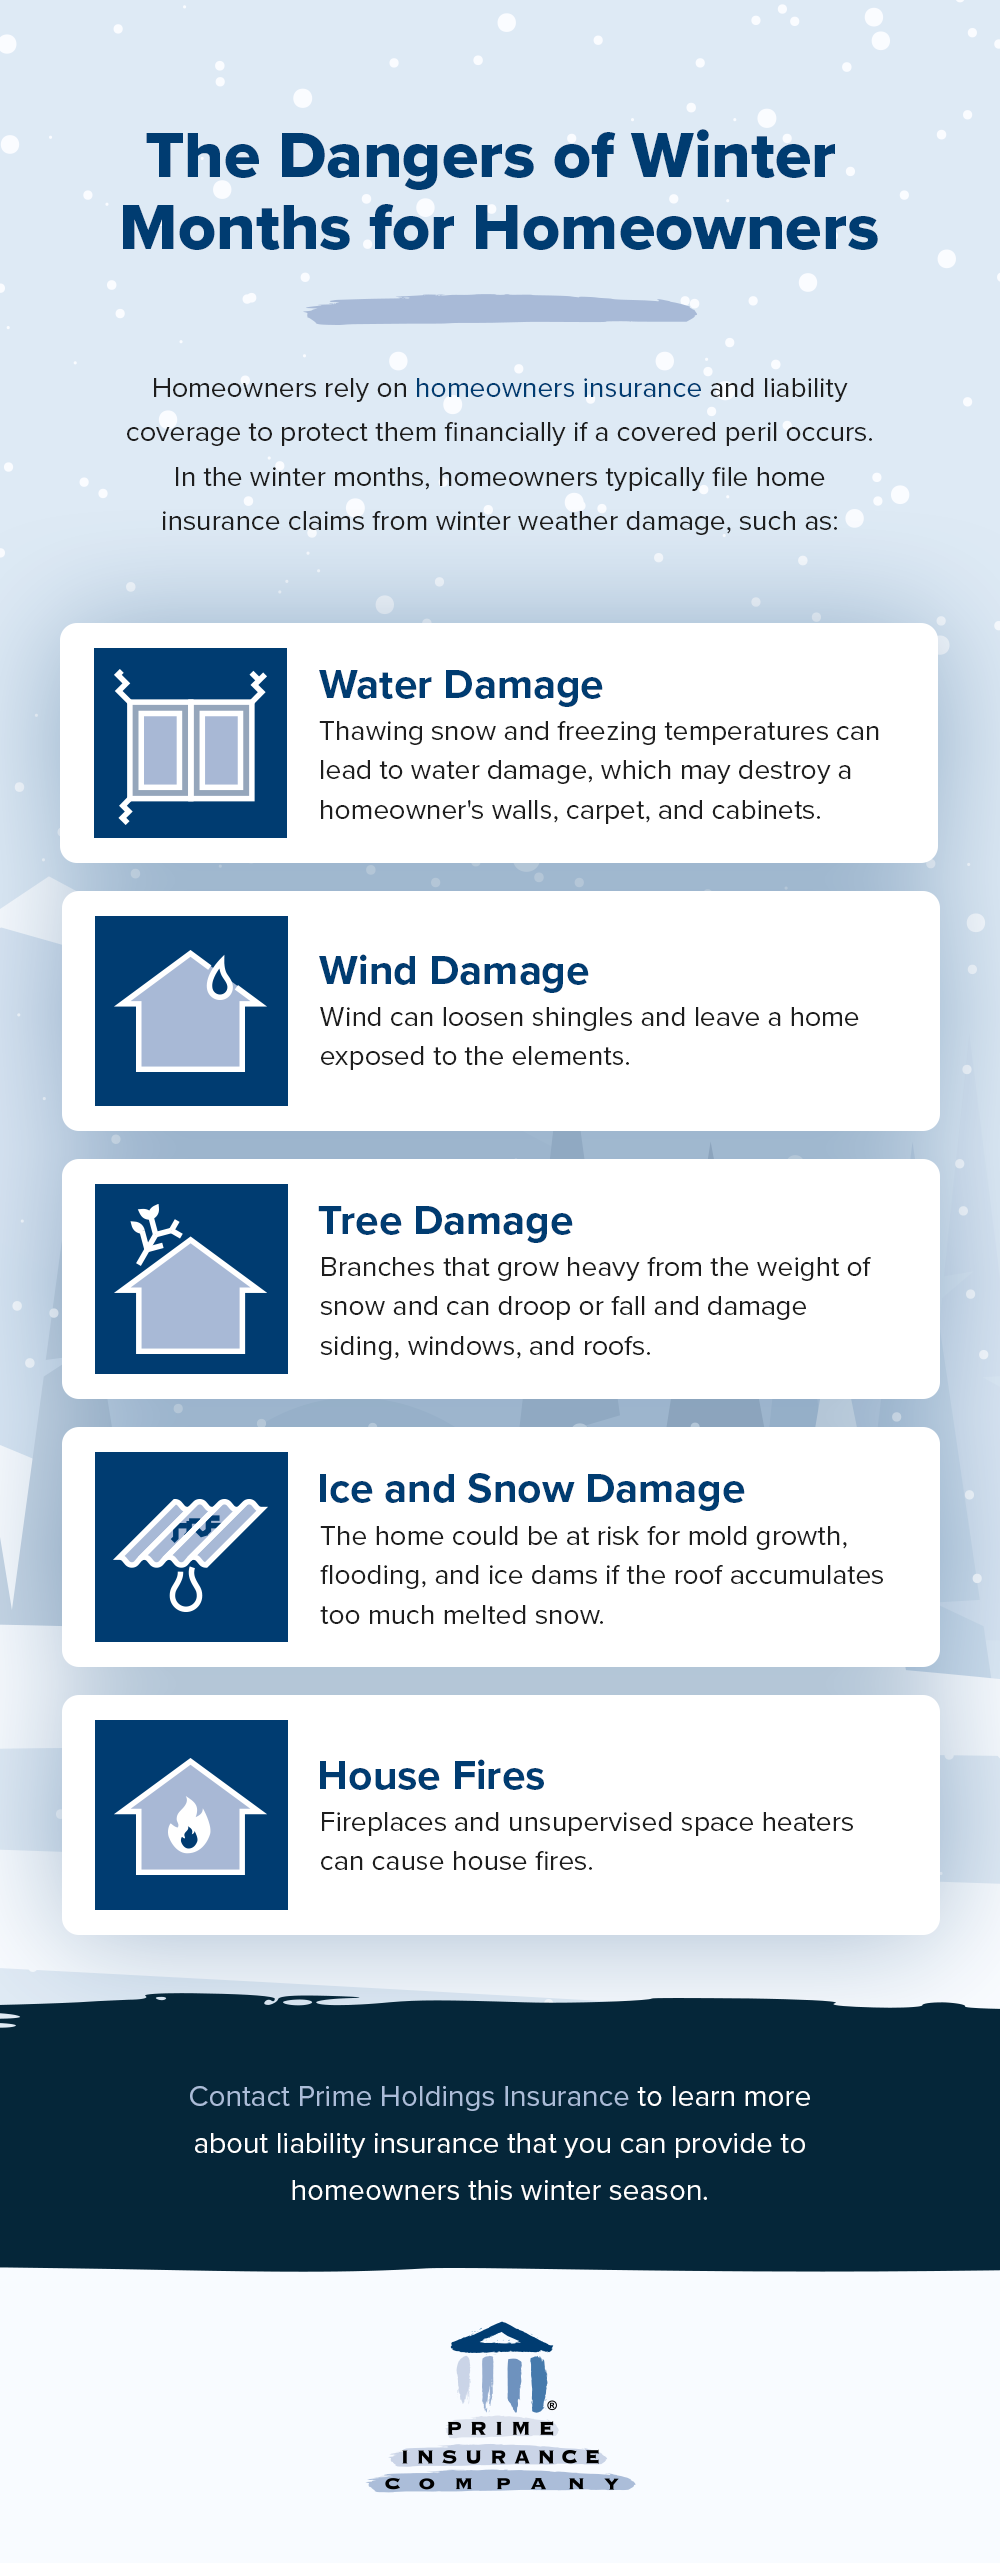 The Dangers of Winter Months for Homeowners